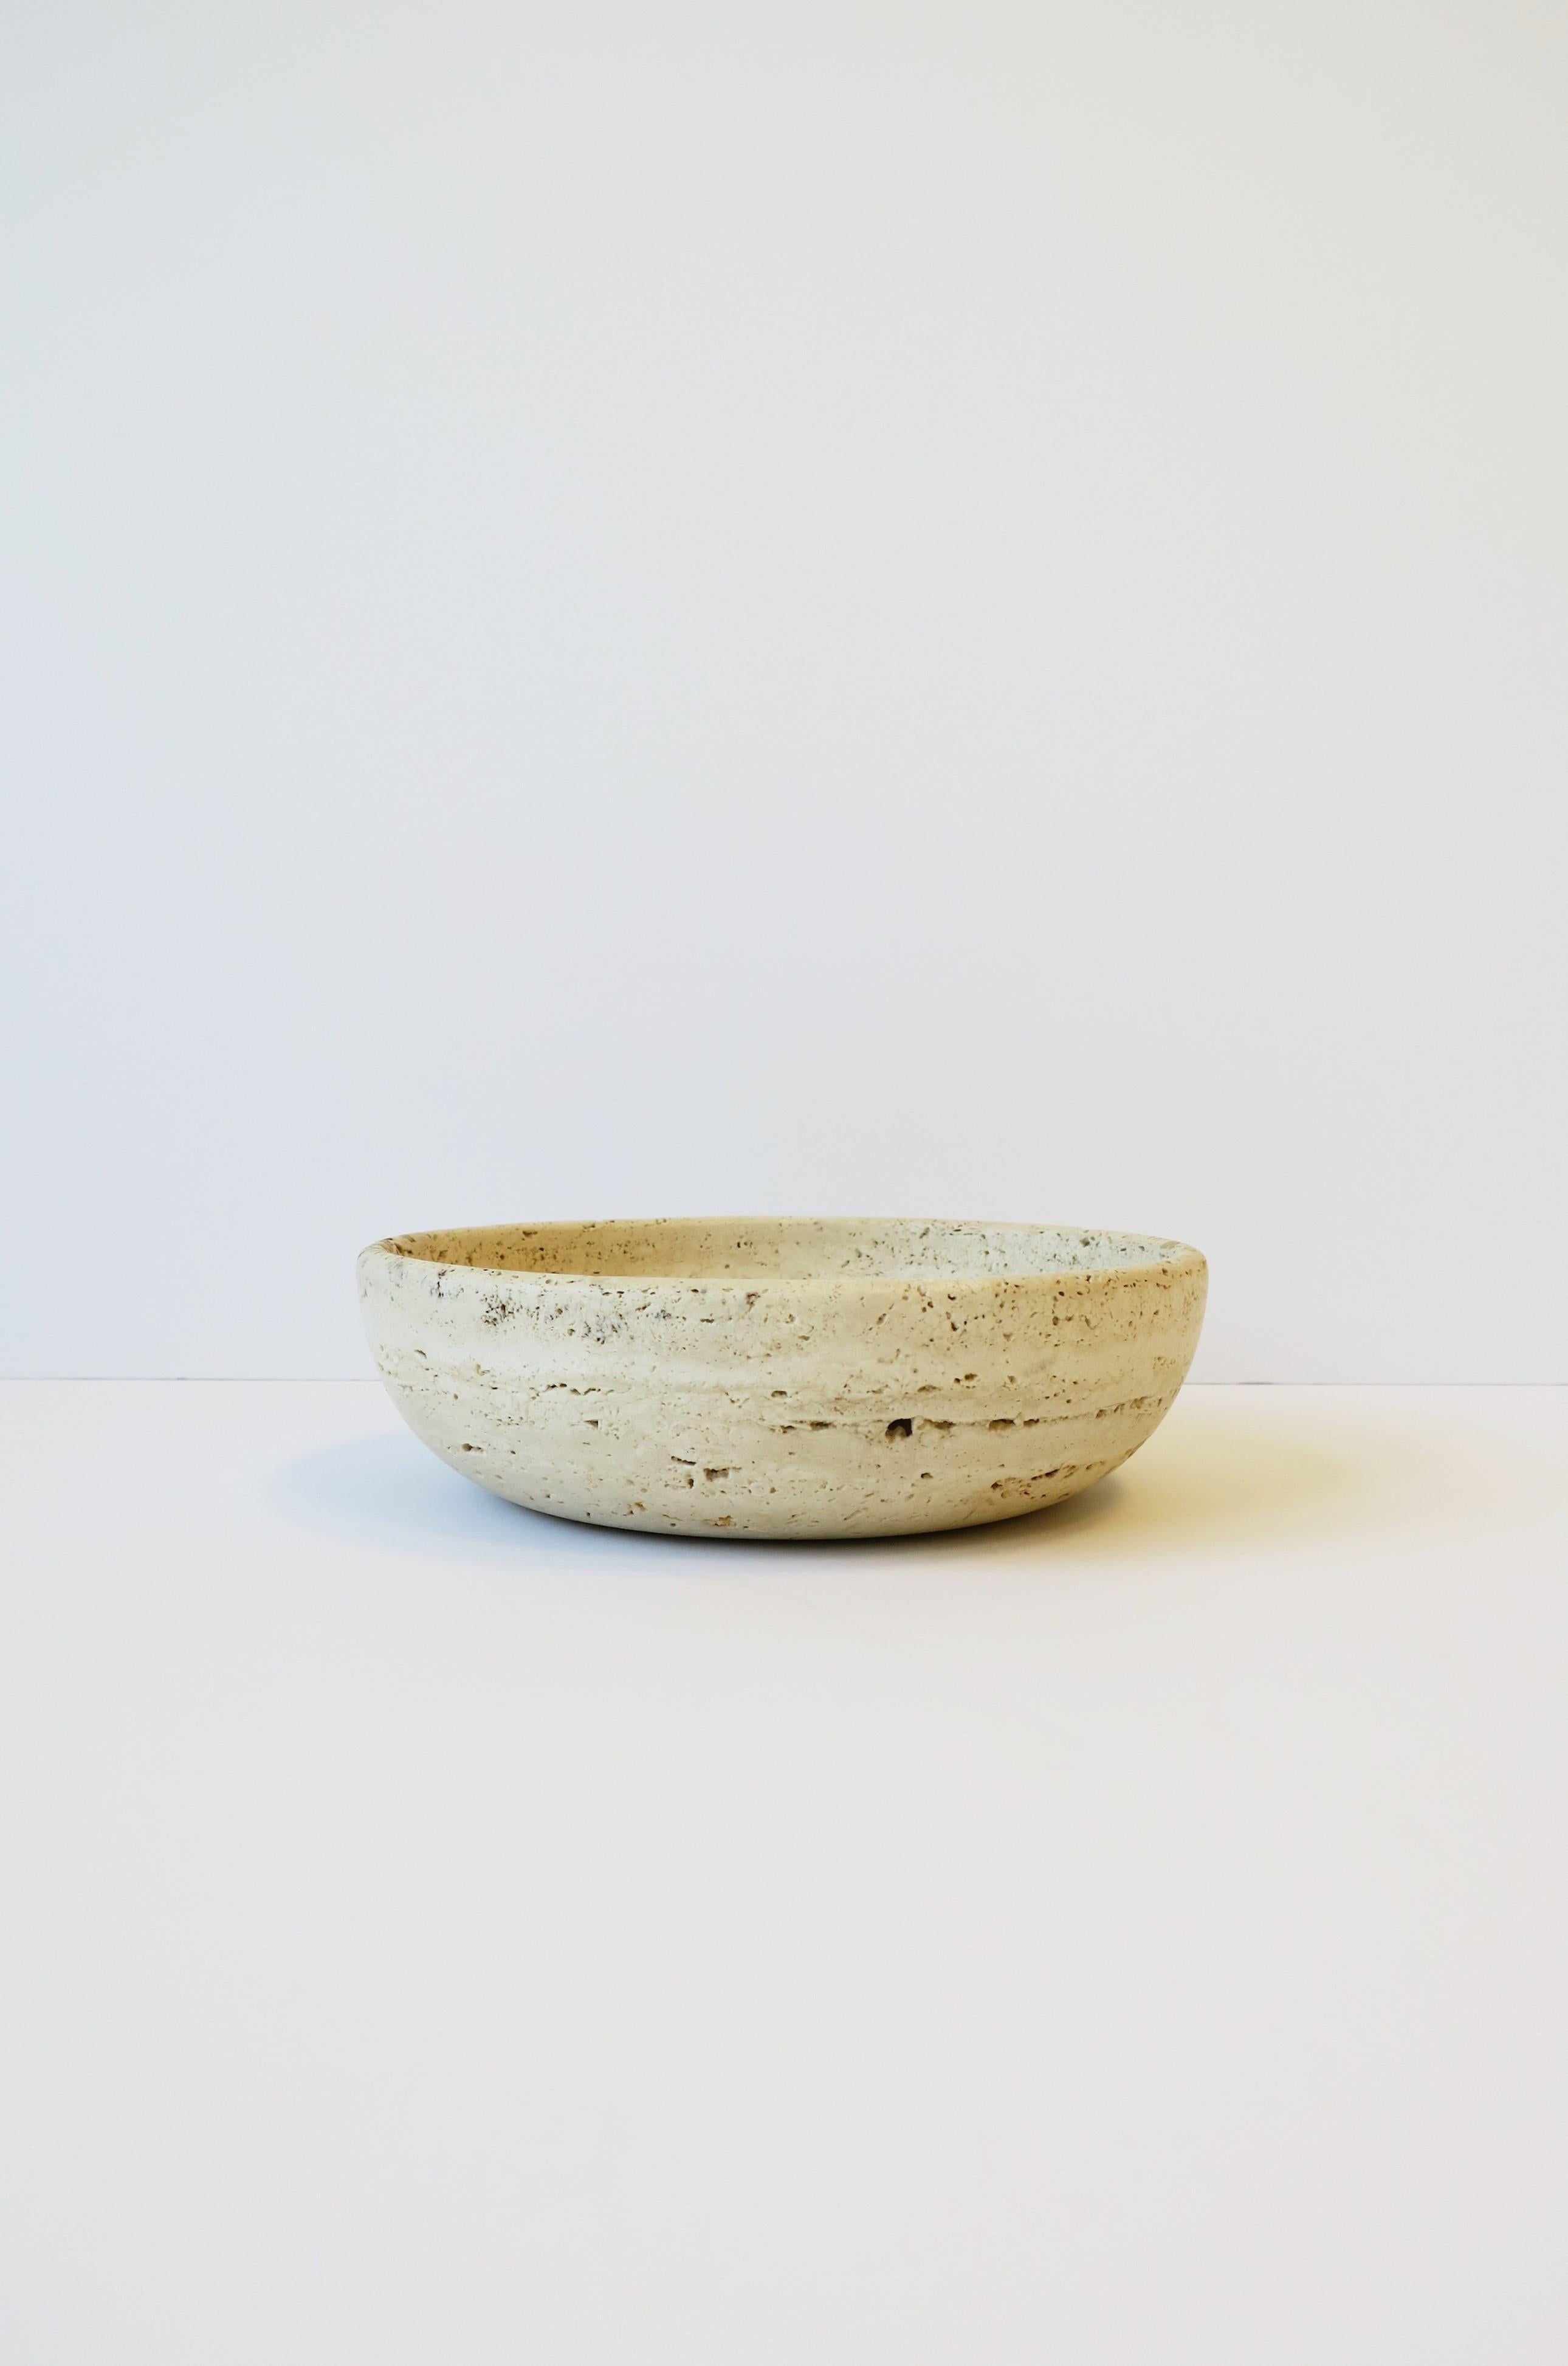 Italian Travertine Marble Bowl, Italy 1970s For Sale 1